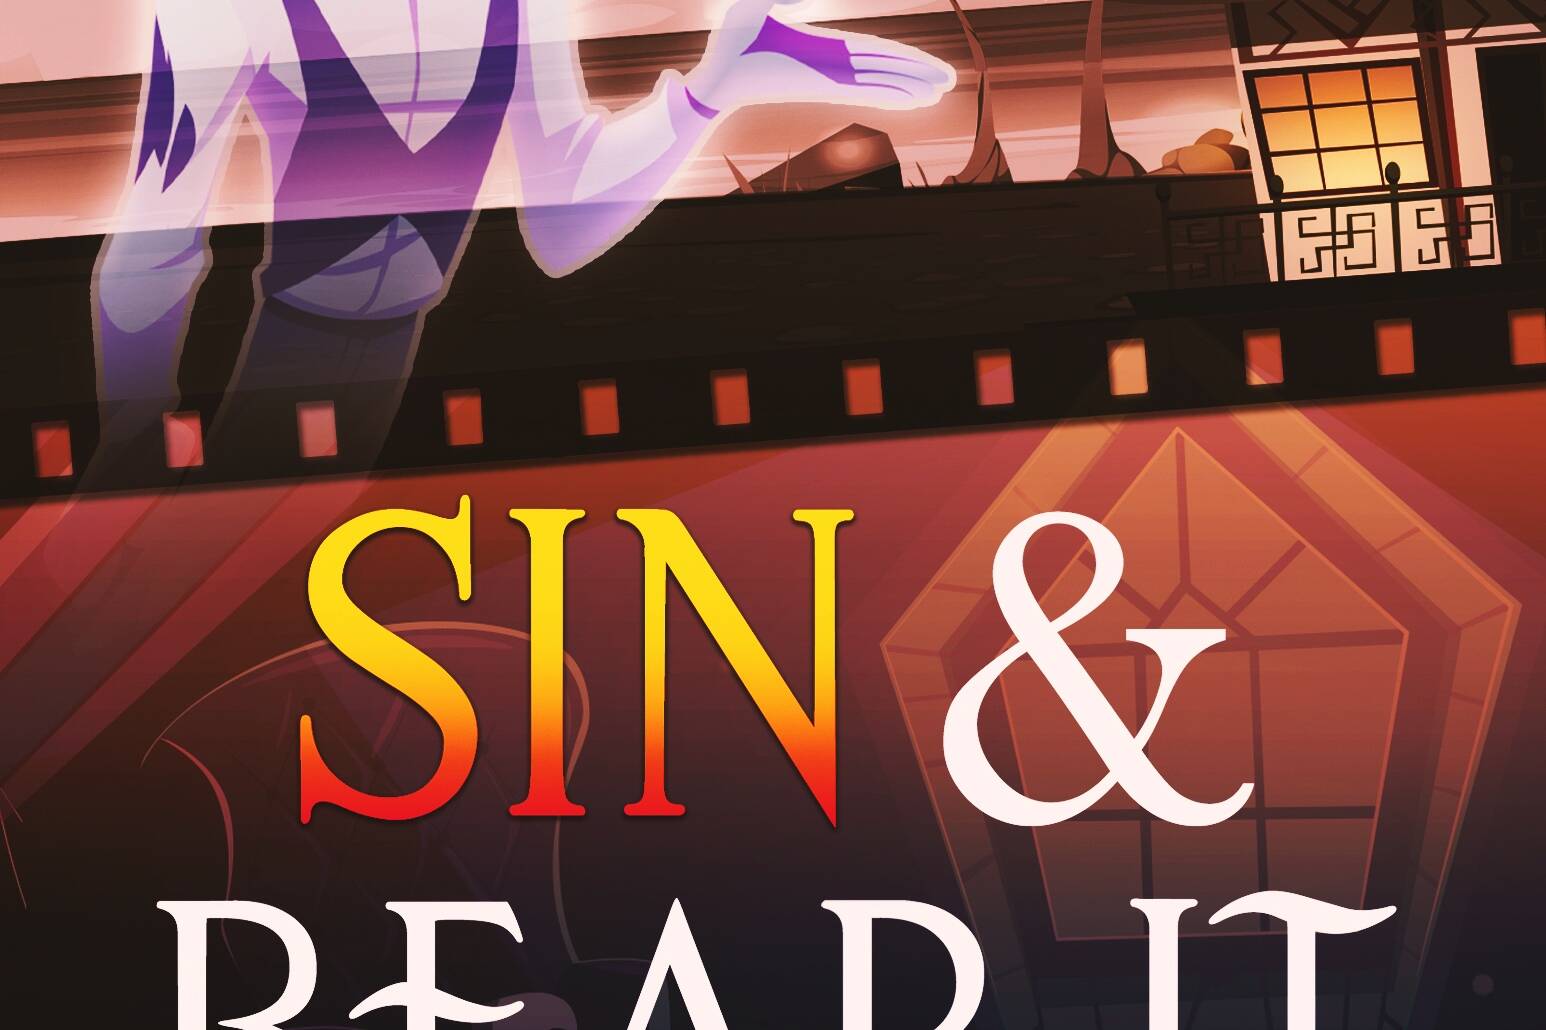 Sin and Bear It, Book 1 in the Sinful House Mysteries